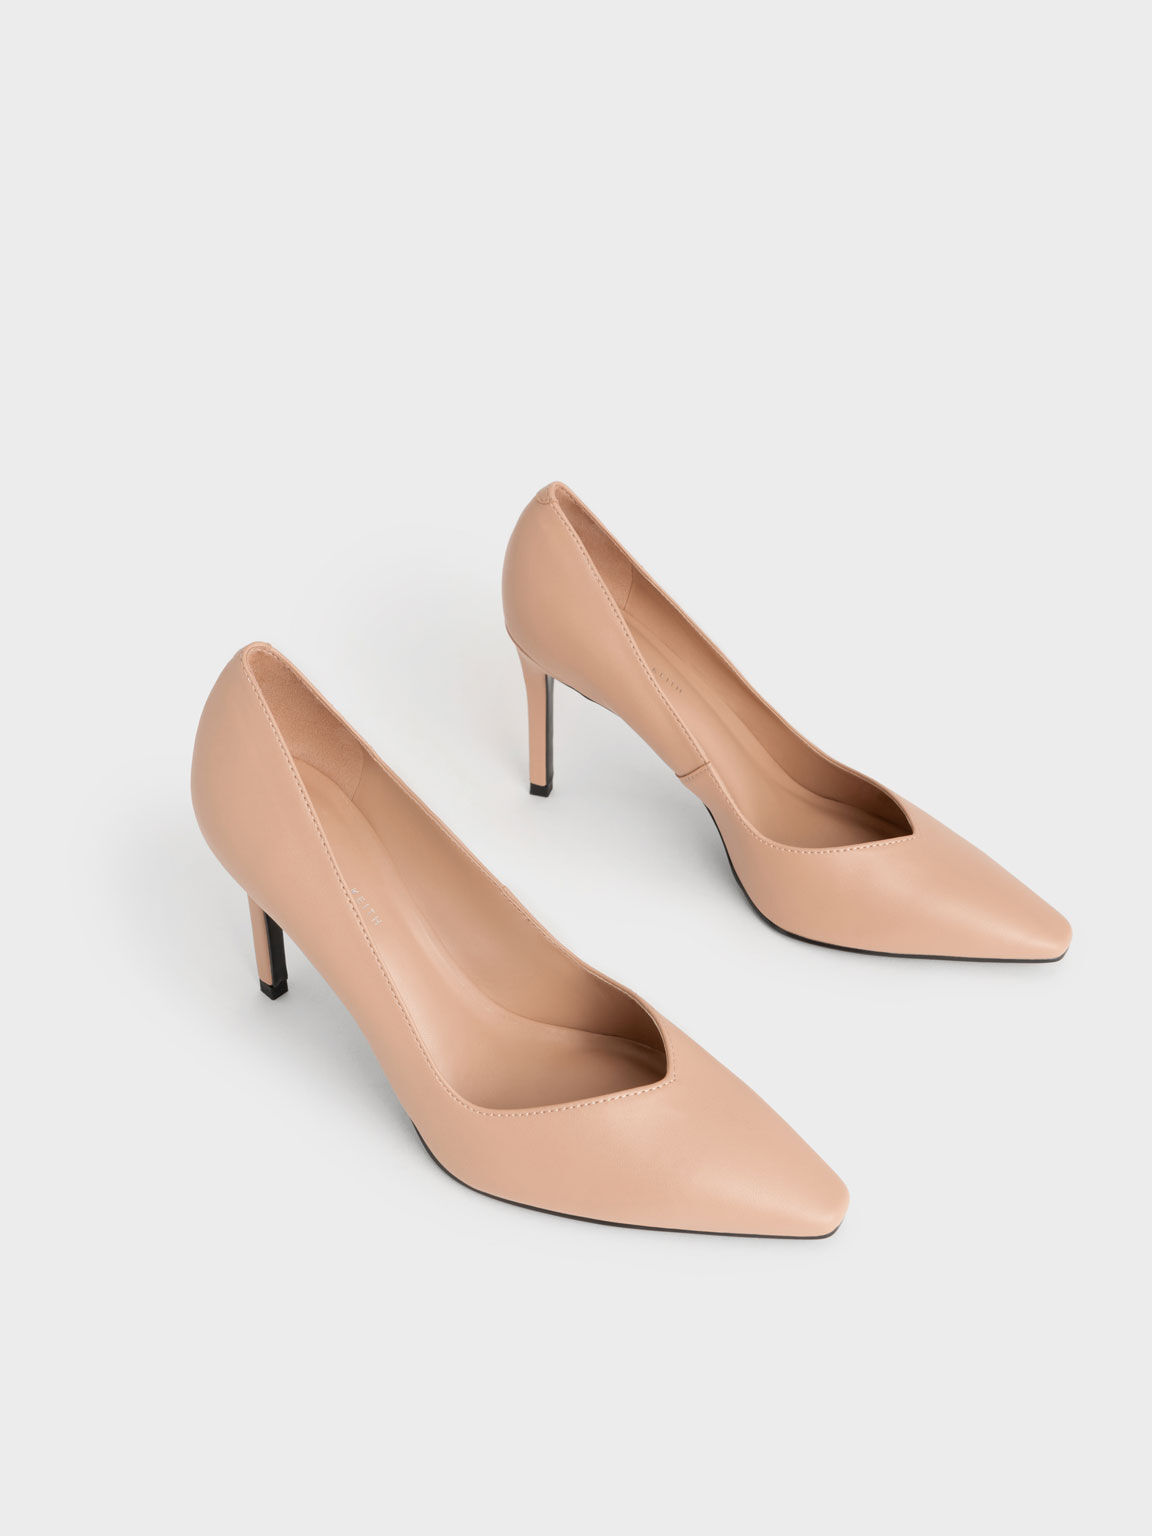 Tapered Square-Toe Pumps, Nude, hi-res